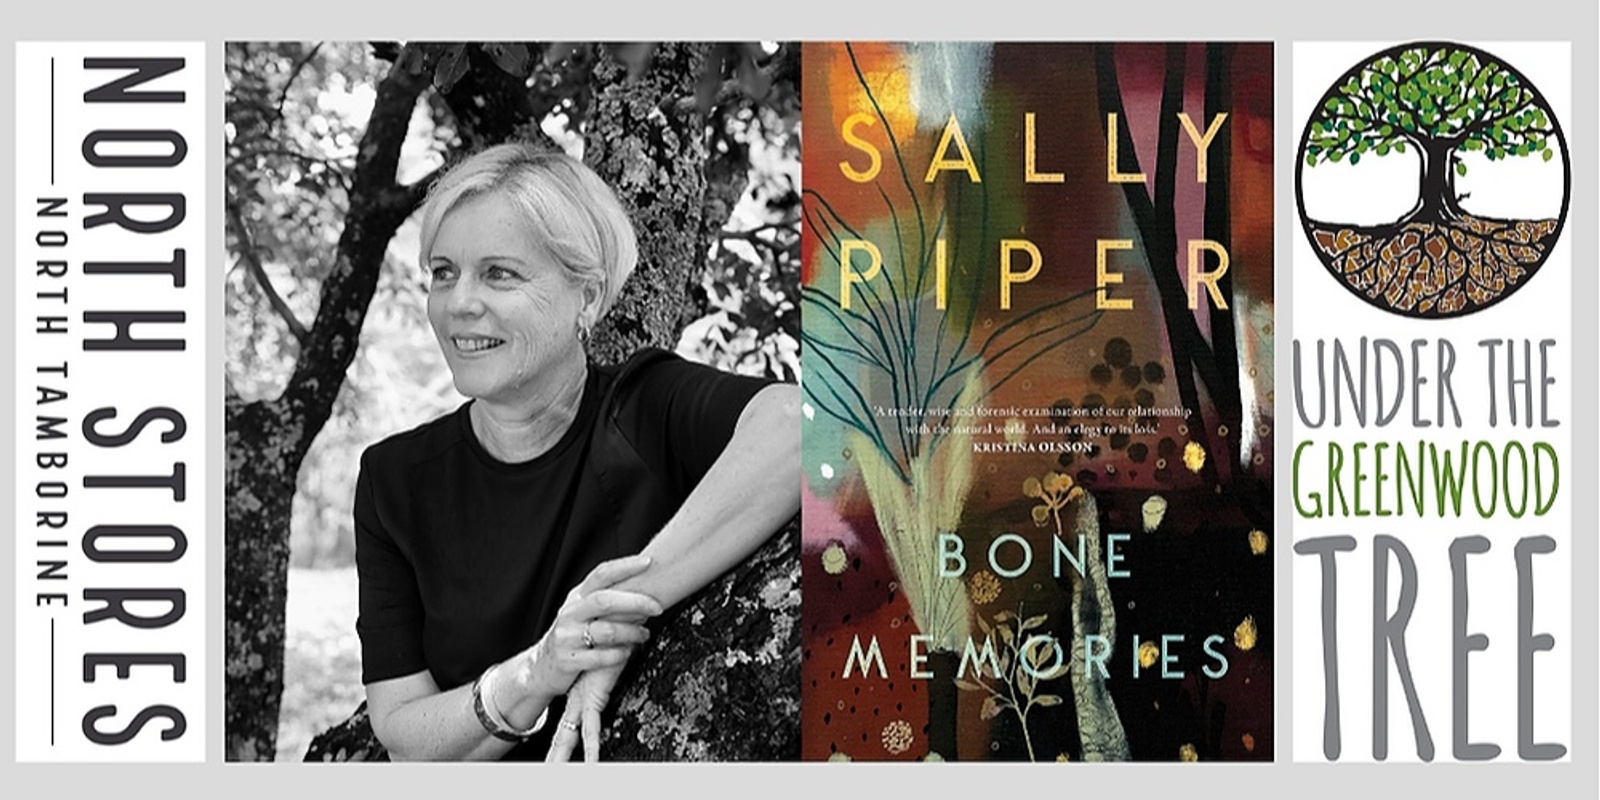 Banner image for Author Talk with Sally Piper + Dinner at North Stores in Mt Tamborine